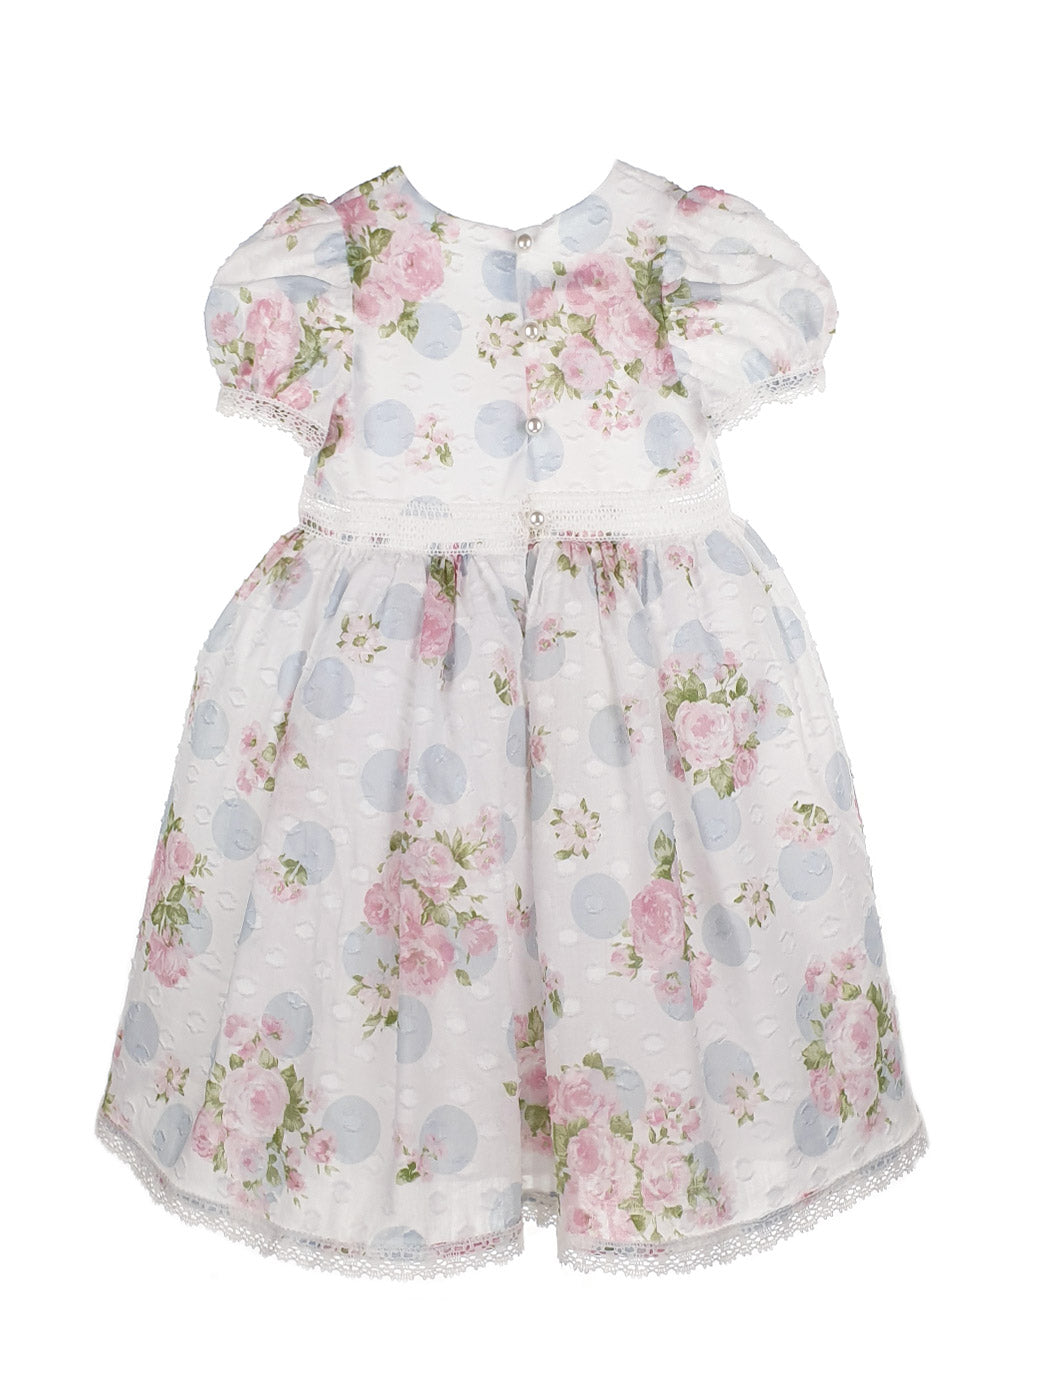 Girl's Floral cotton dress with sleeve-DOTA